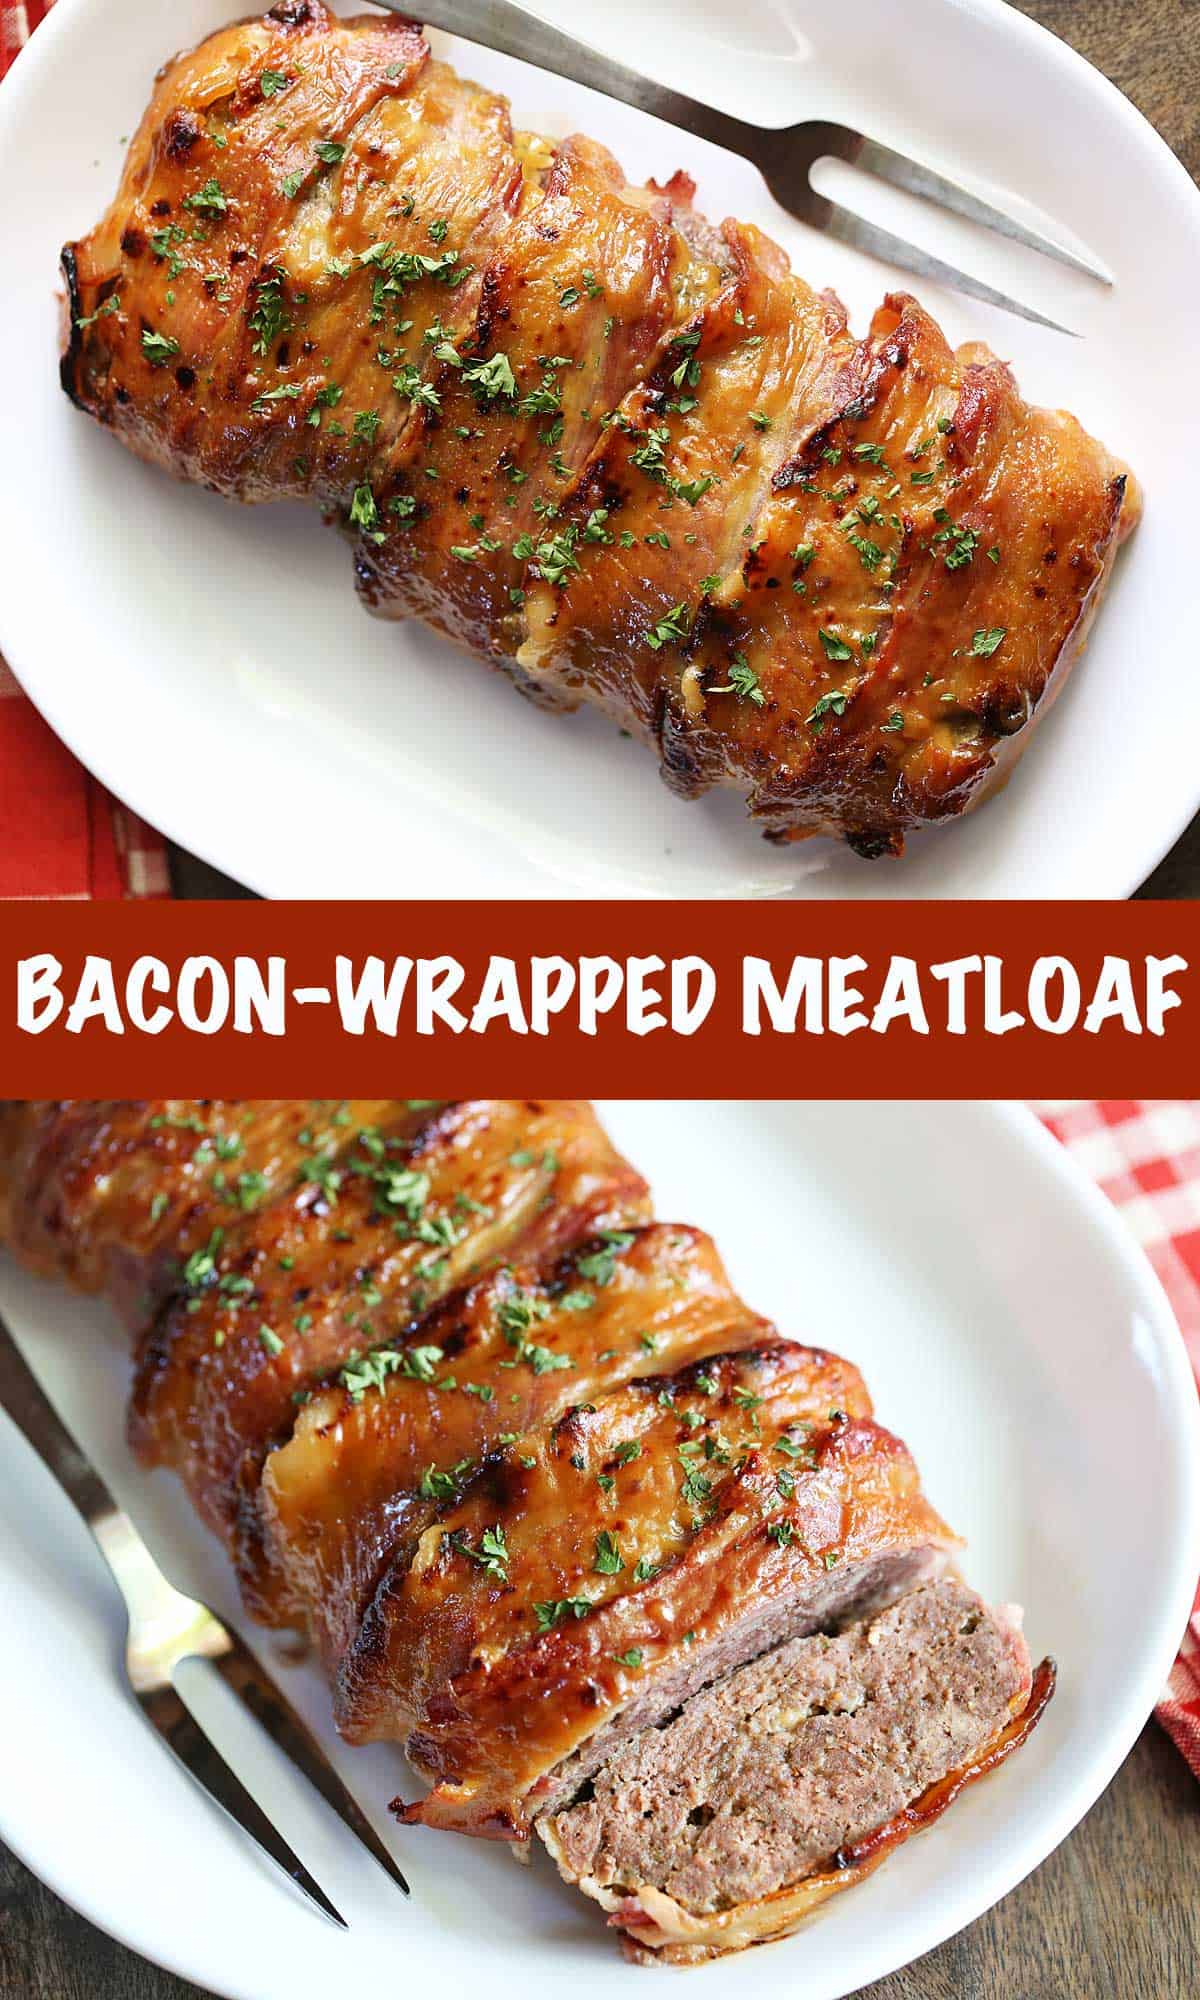 Two photos of bacon-wrapped meatloaf, one whole and one sliced. 